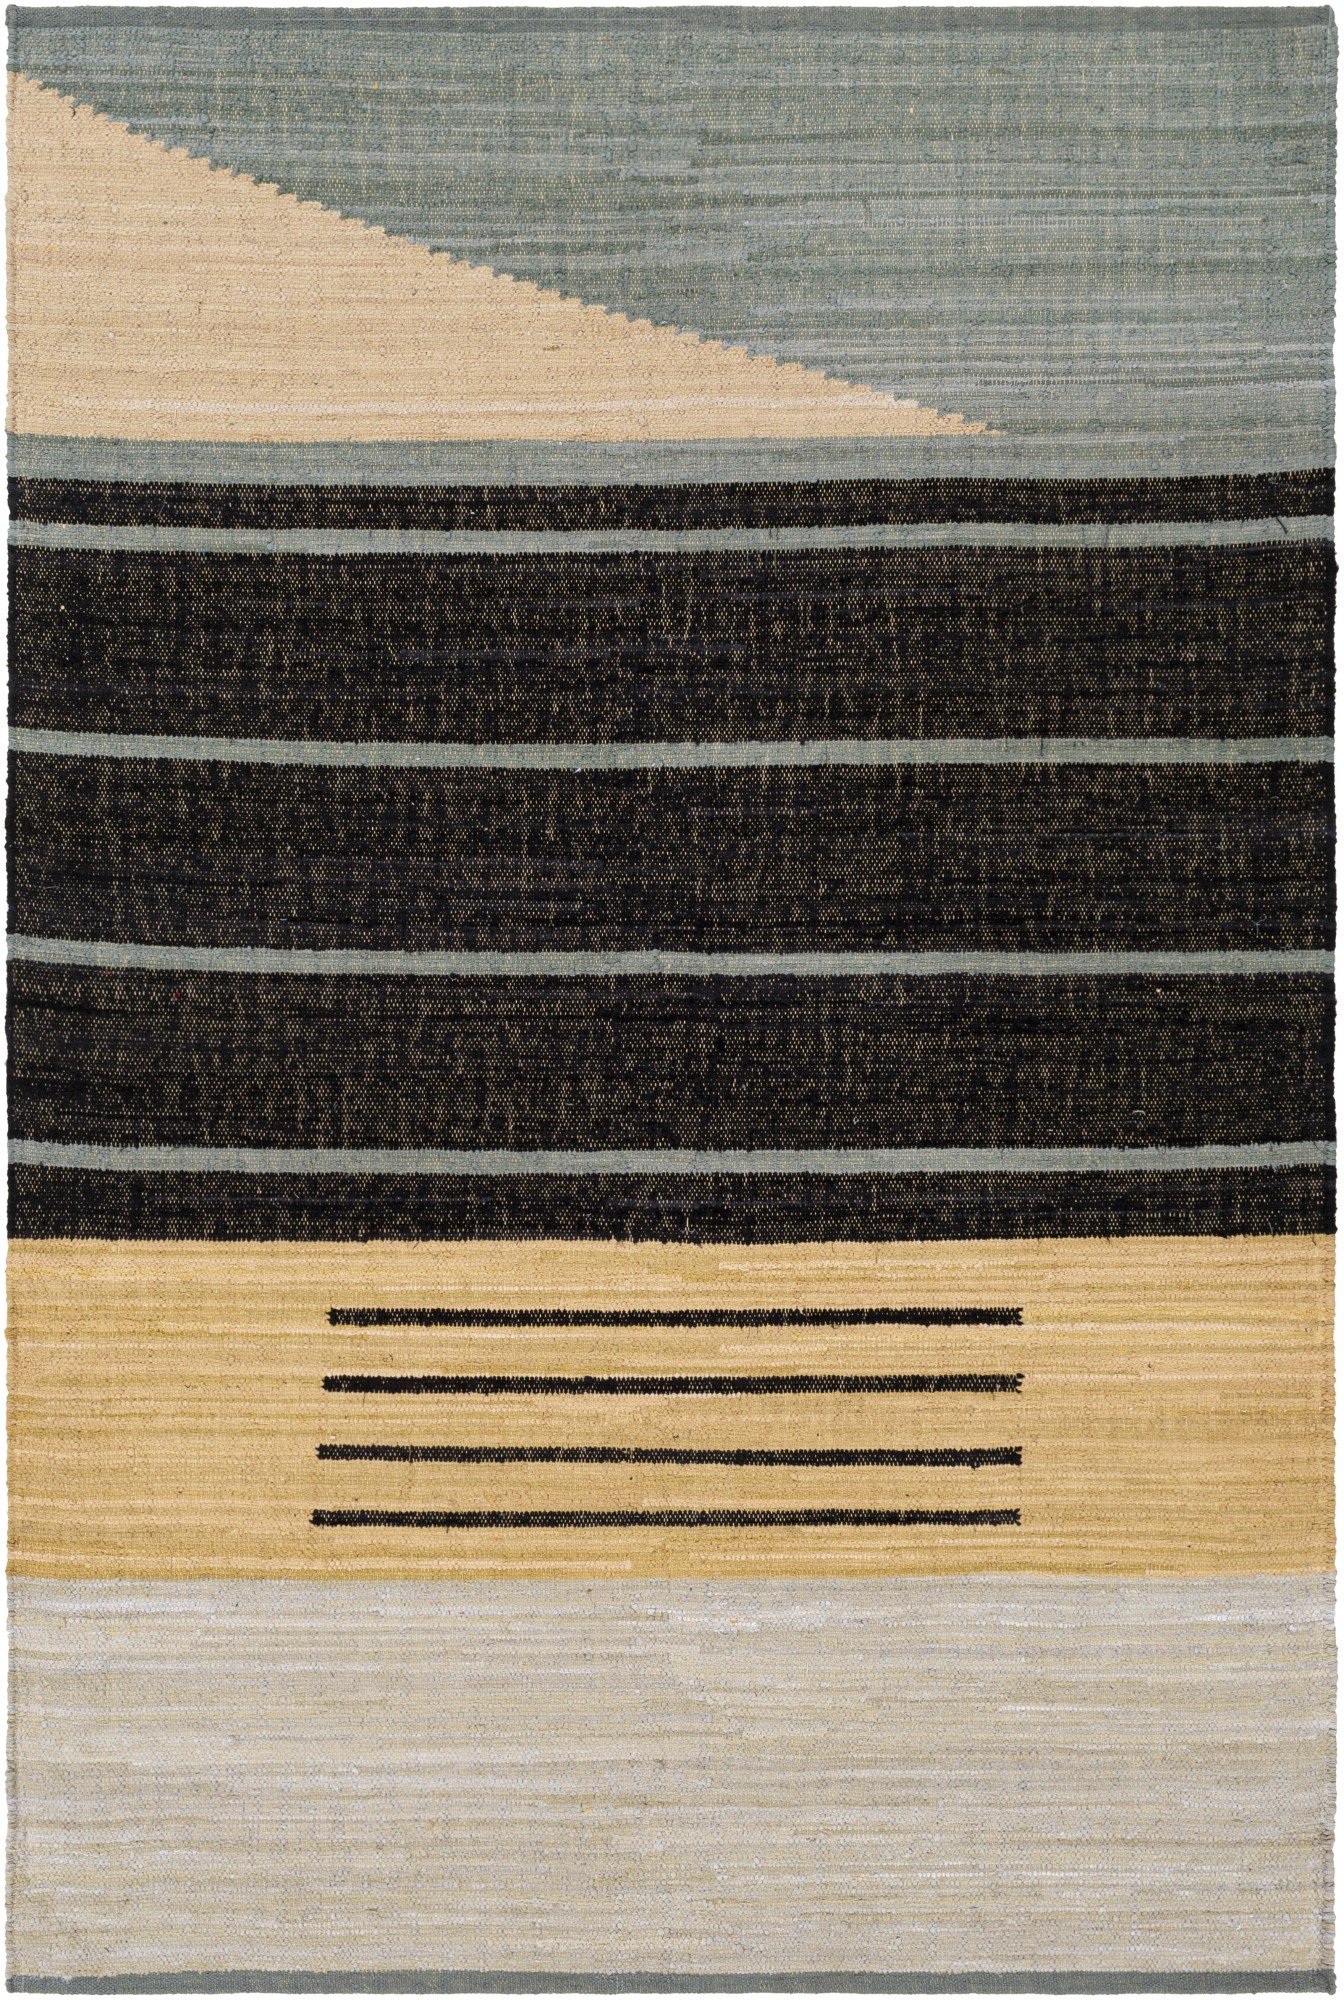 Blue Striped Rugs Direct, Light Blue And White Striped Rug